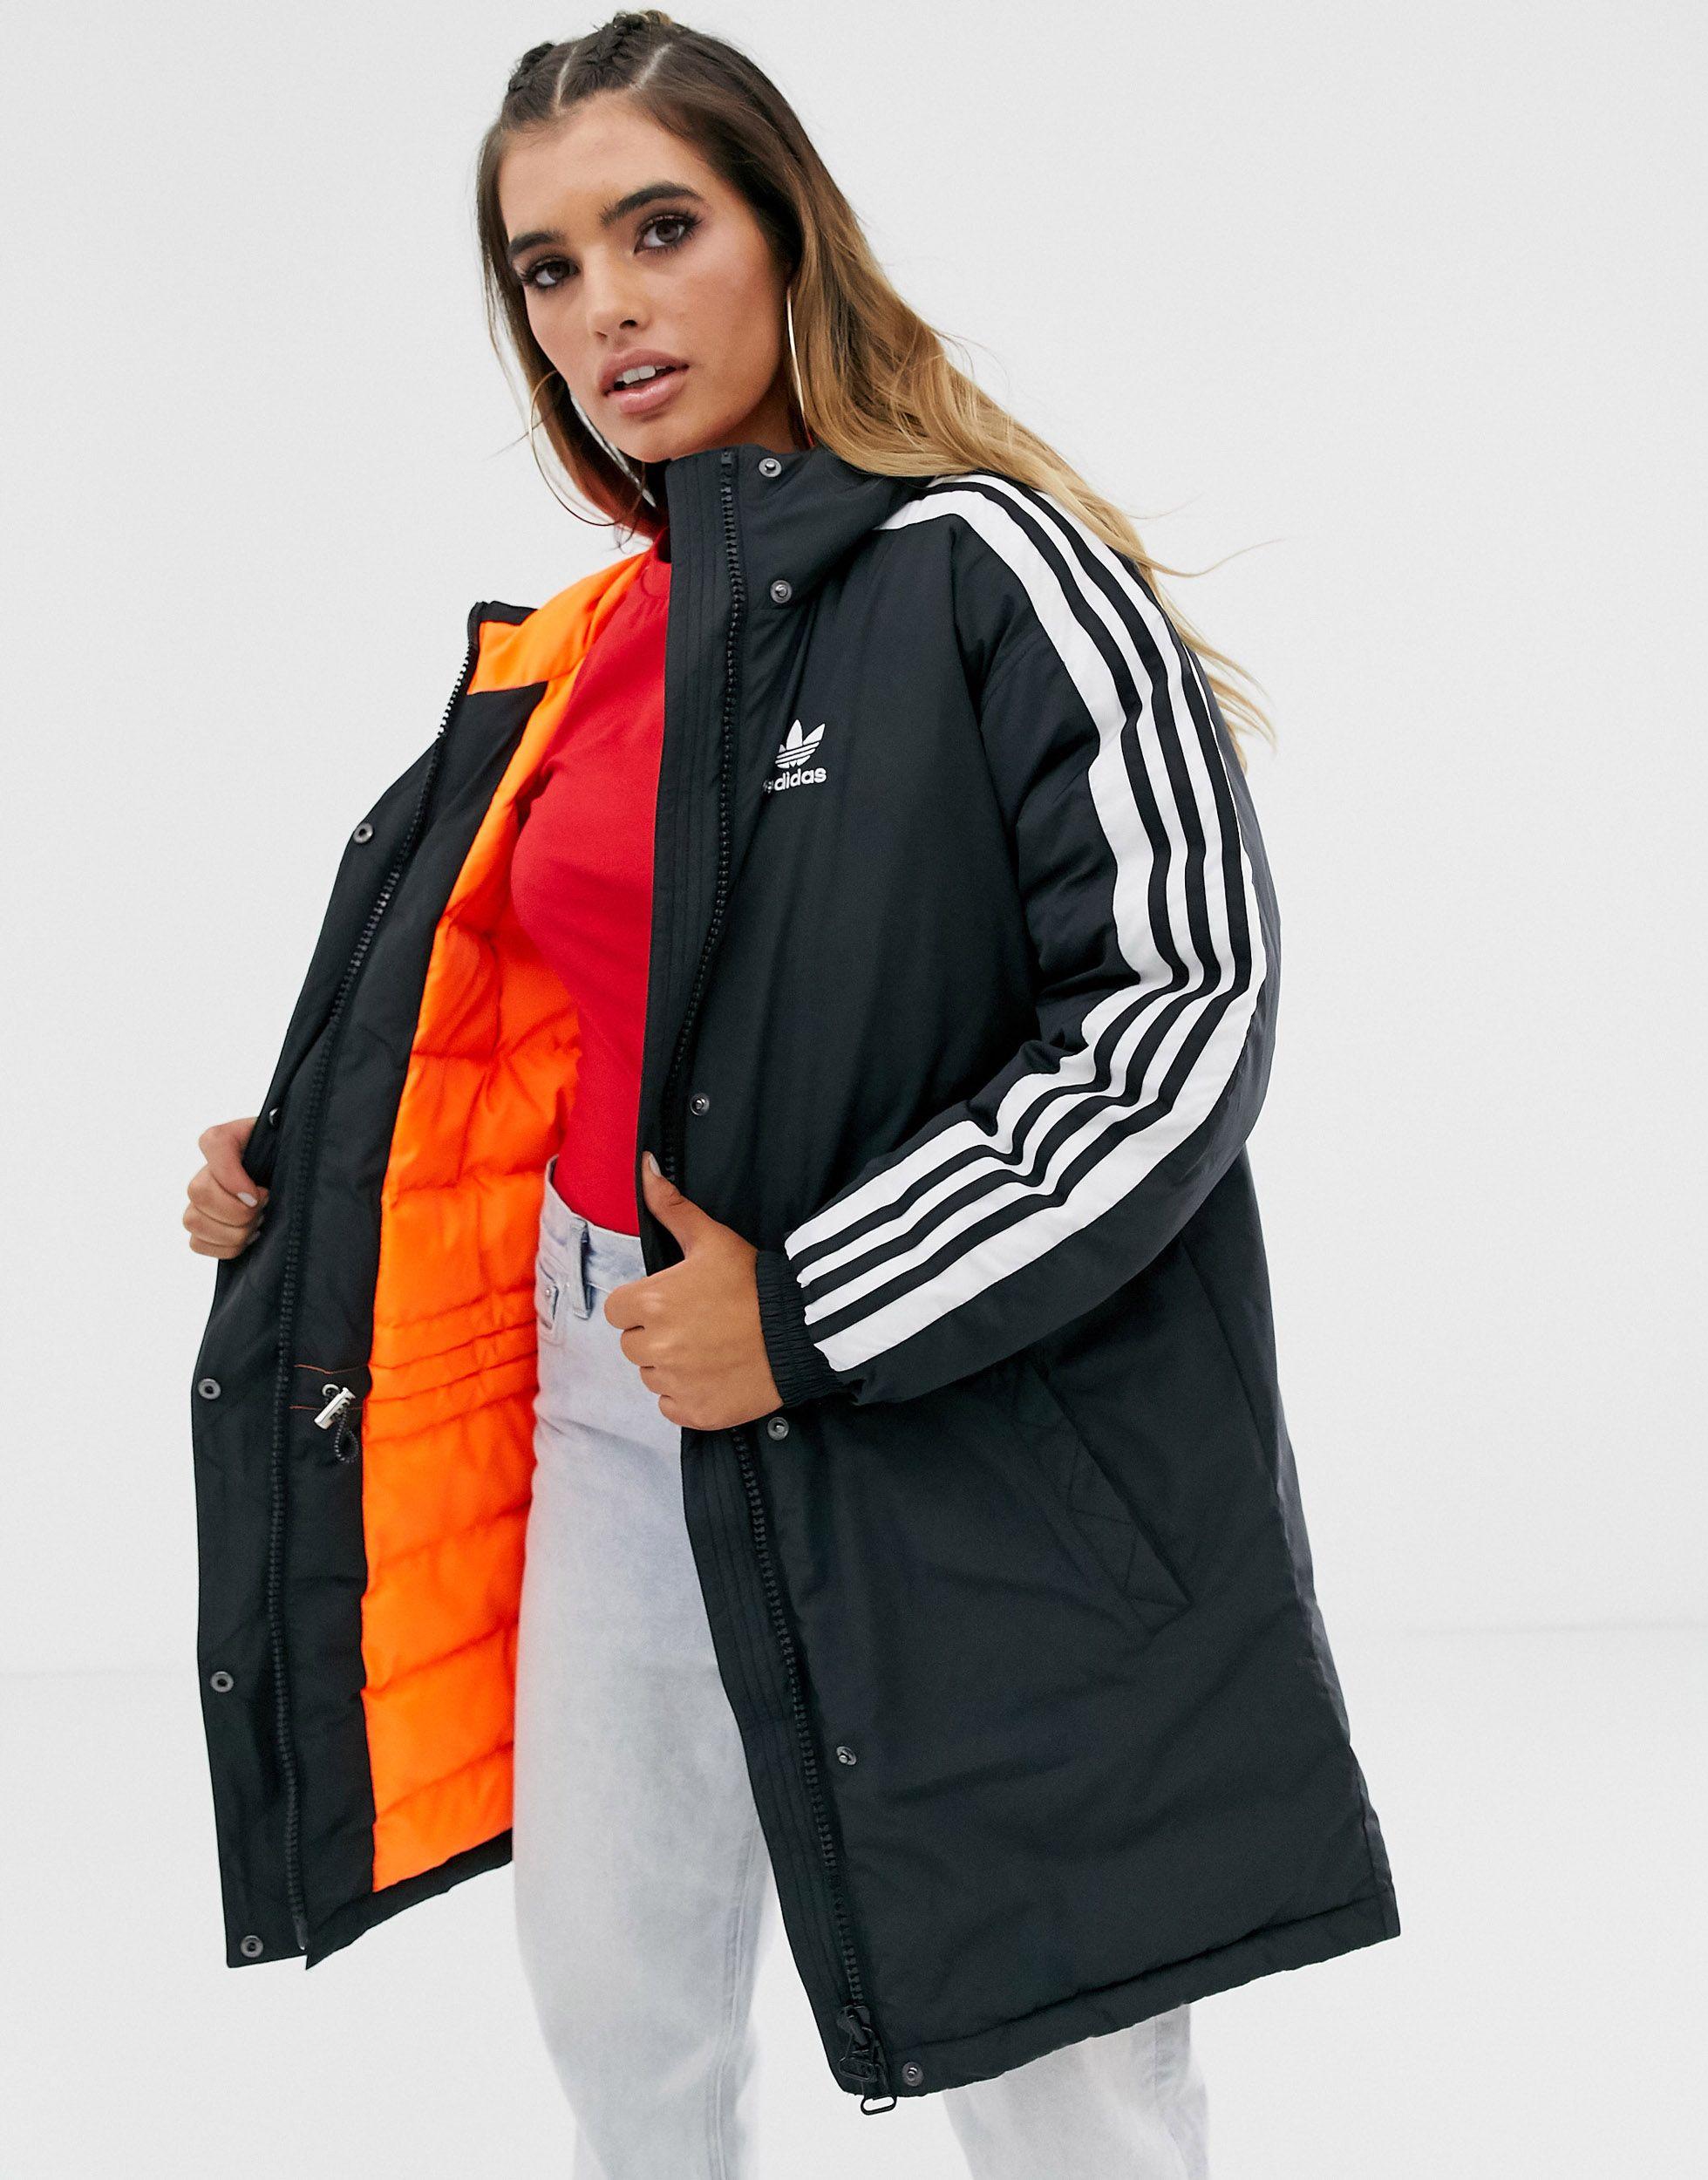 Adidas Originals Parka With 3 Stripes In Luxembourg, 32% - mpgc.net